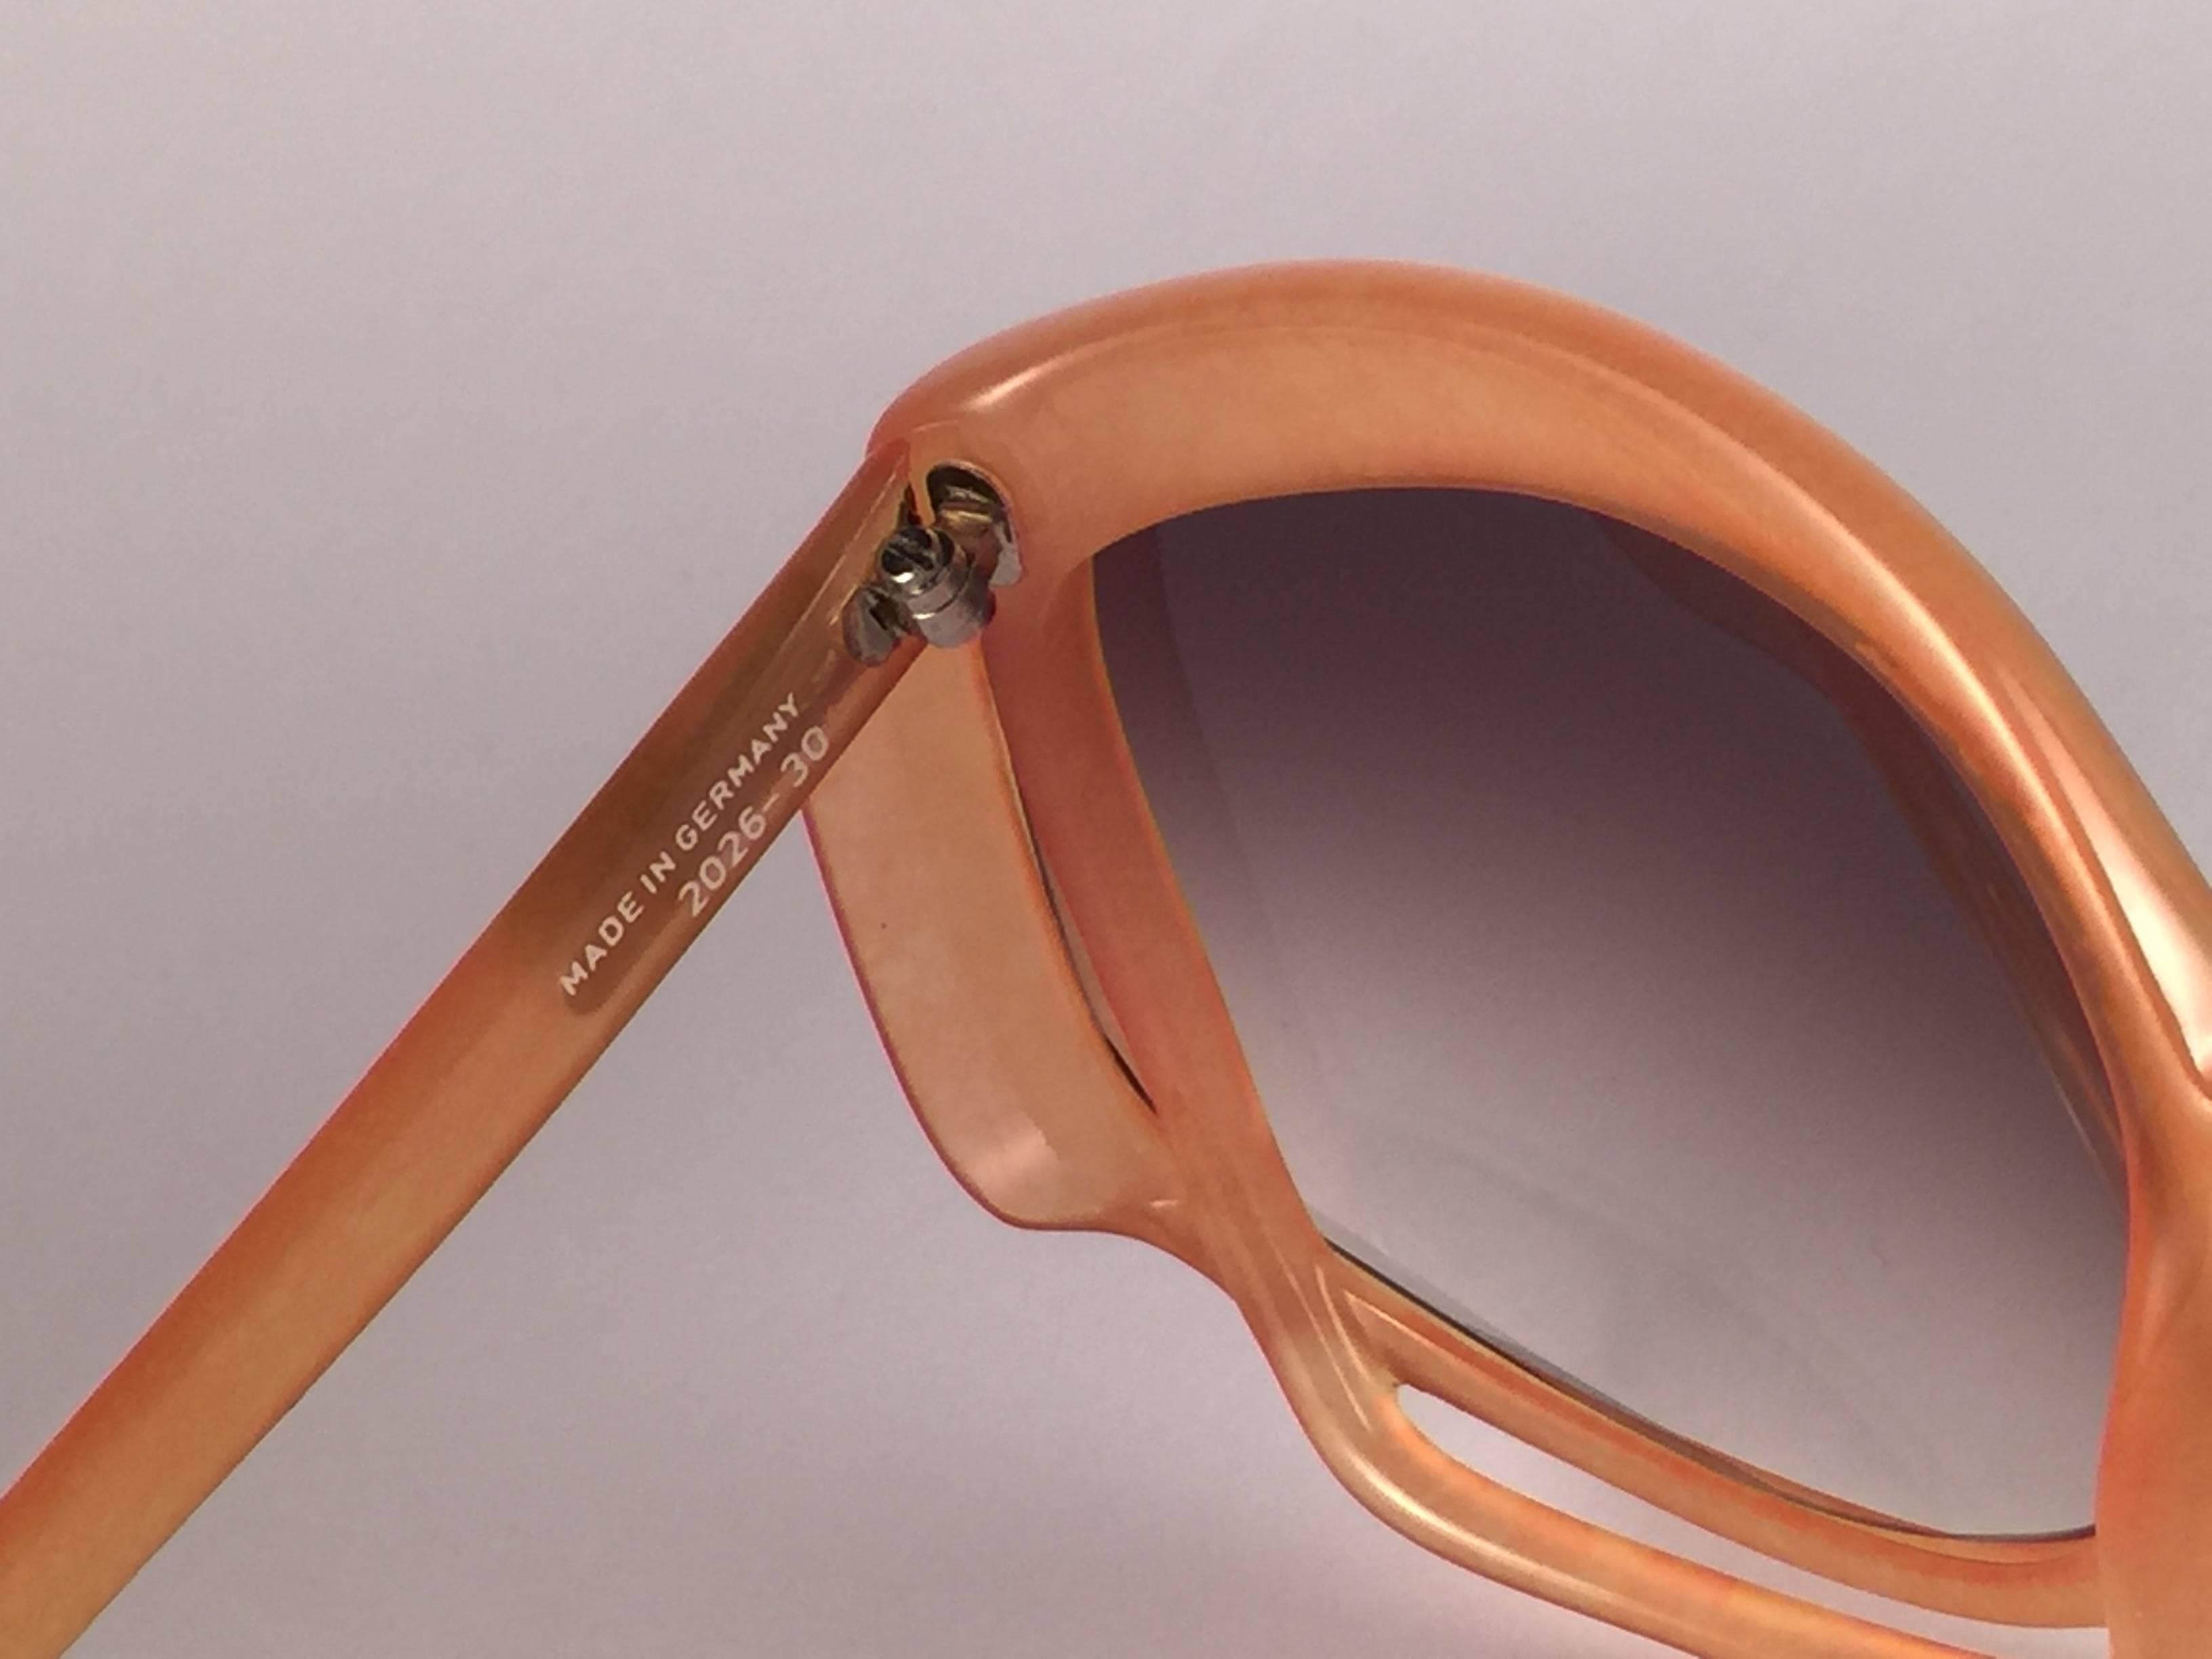 New Vintage Christian Dior 2026 30 Tangerine Optyl Sunglasses Germany In New Condition For Sale In Baleares, Baleares